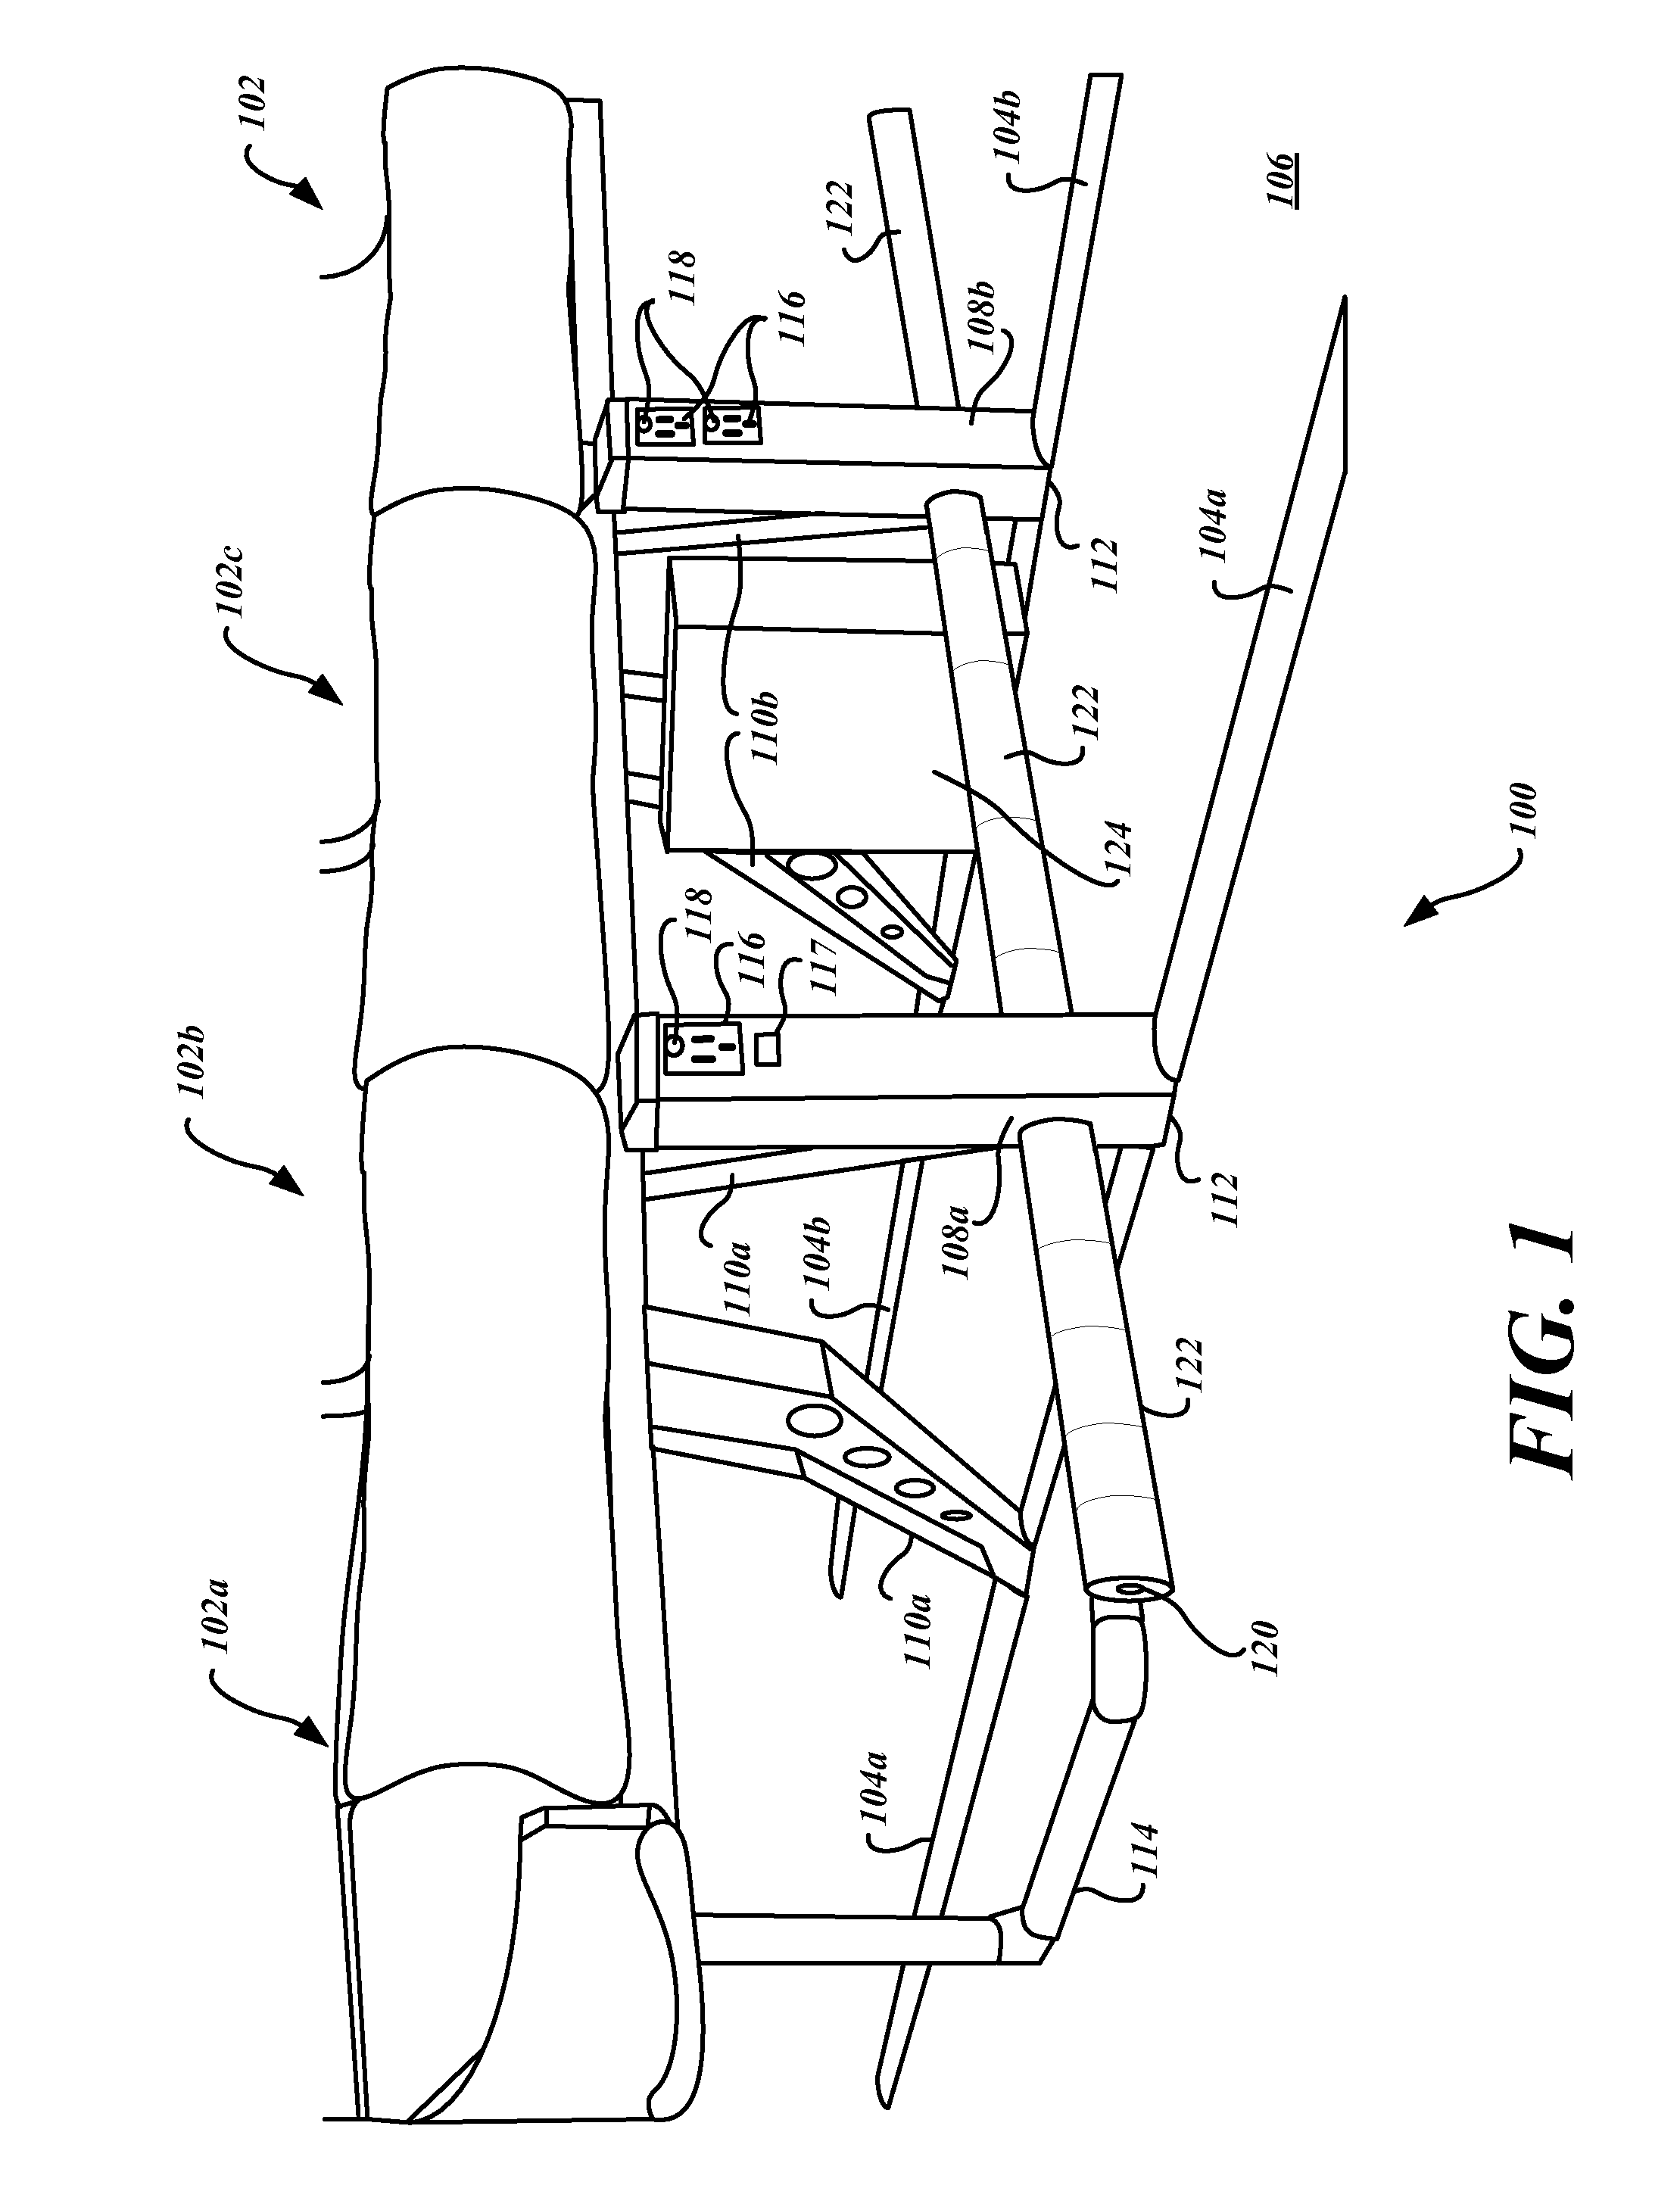 Systems and methods for securing and protecting aircraft line replaceable units with status indicator under a passenger seat